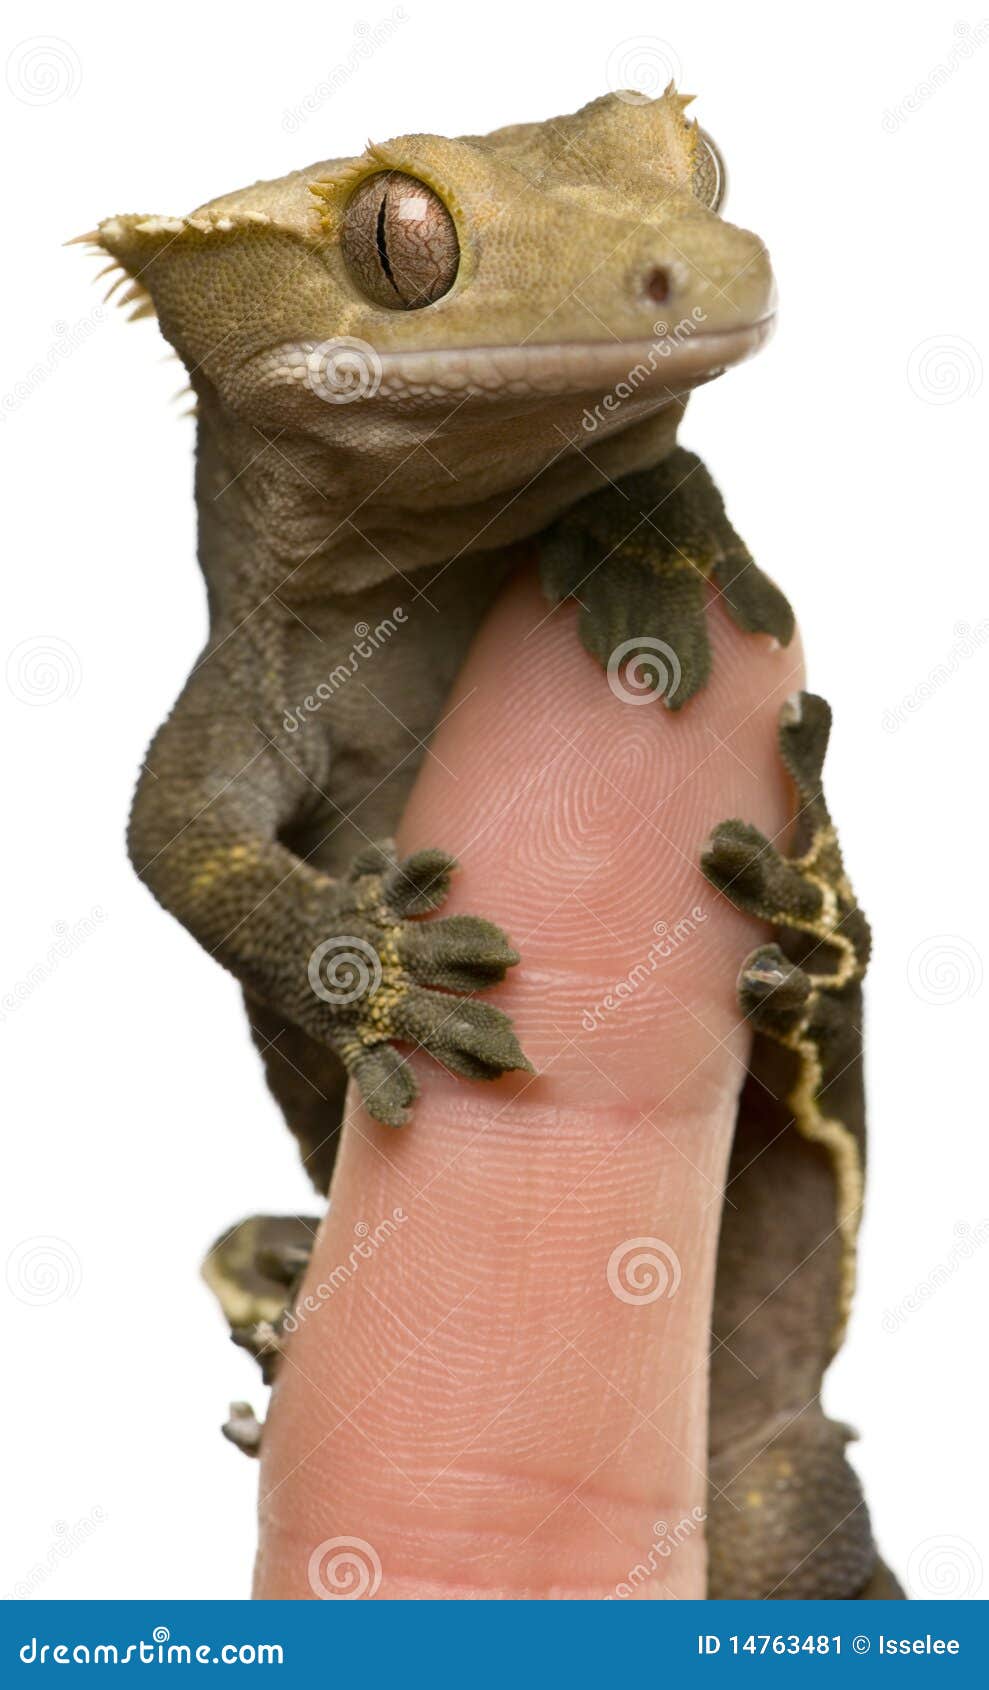 new caledonian crested gecko on fingertip